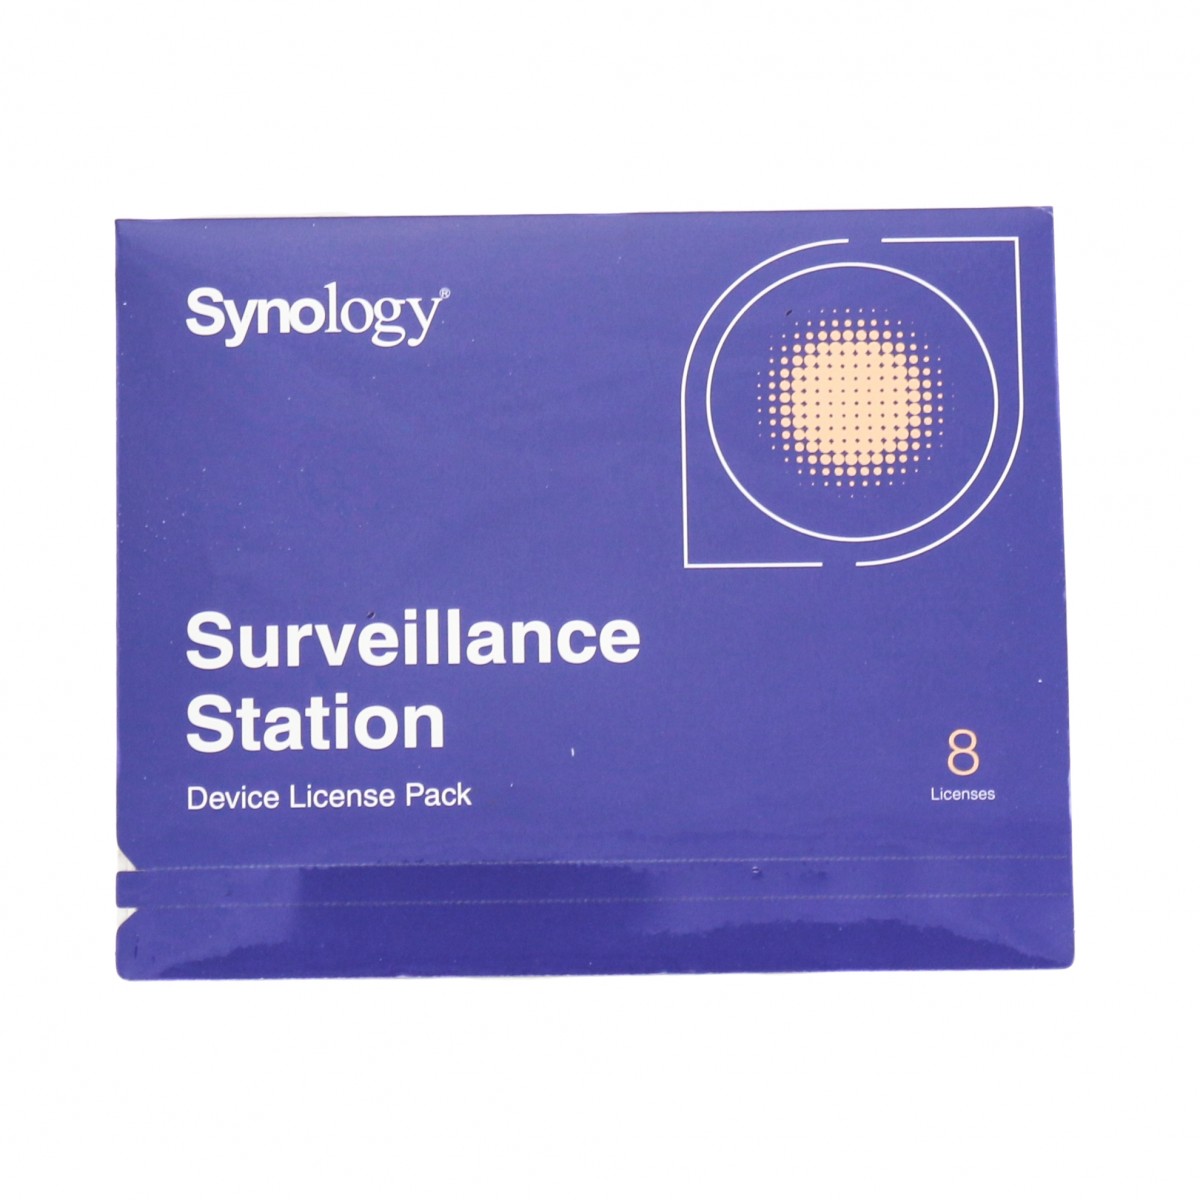 Synology surveillance license cost